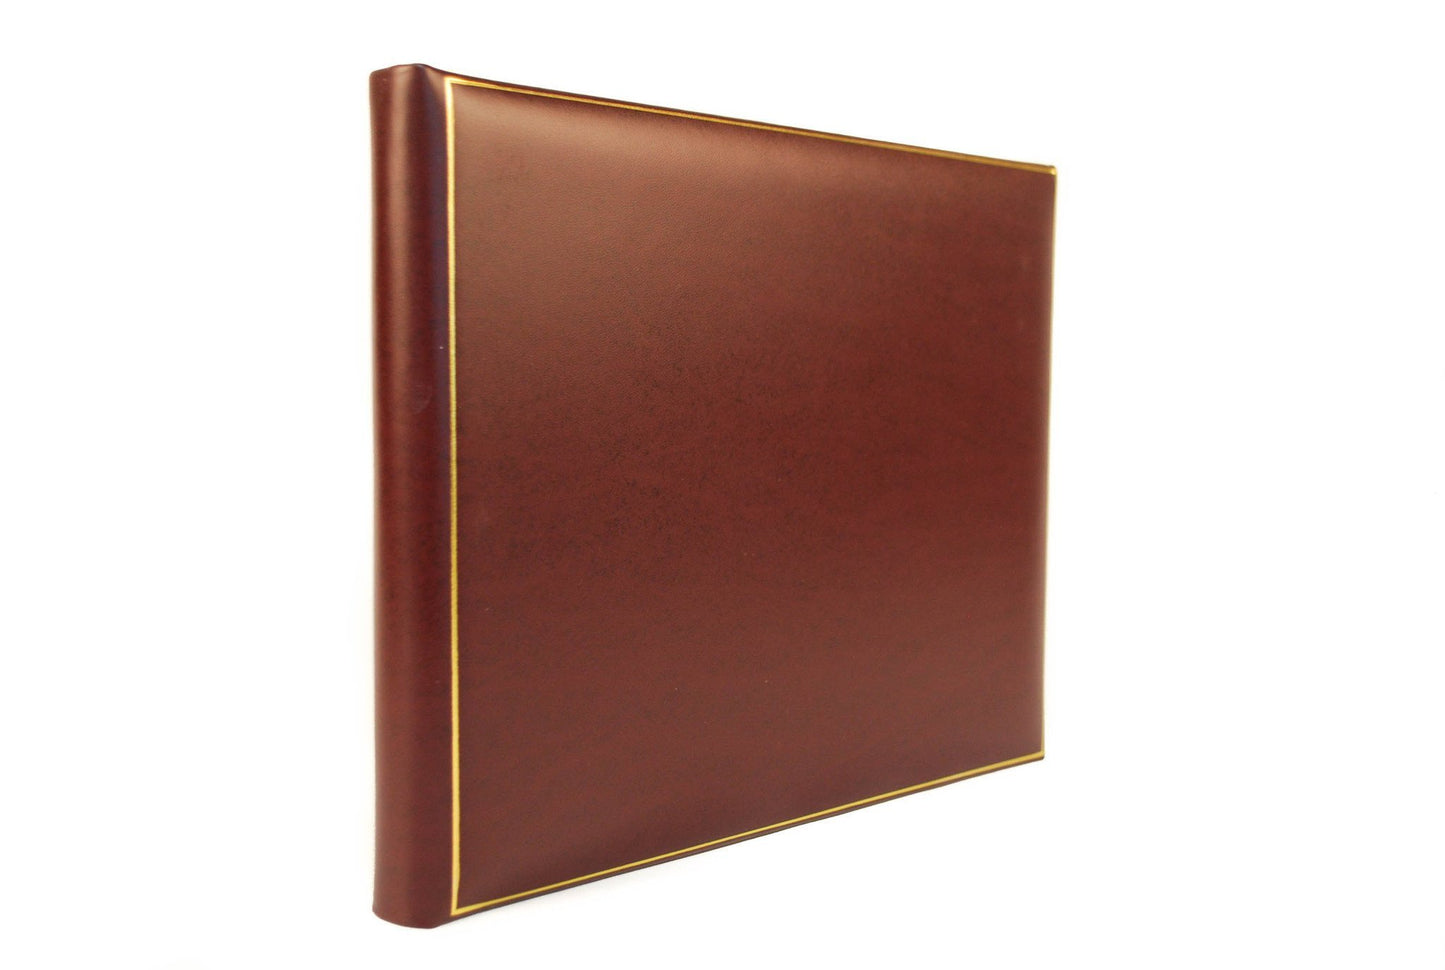 Guest Book | 8 by 10 Inches | Superior Quality Smooth Calf | Blank Pages | Hand Made in England | Charing Cross-Guest Book-Sterling-and-Burke